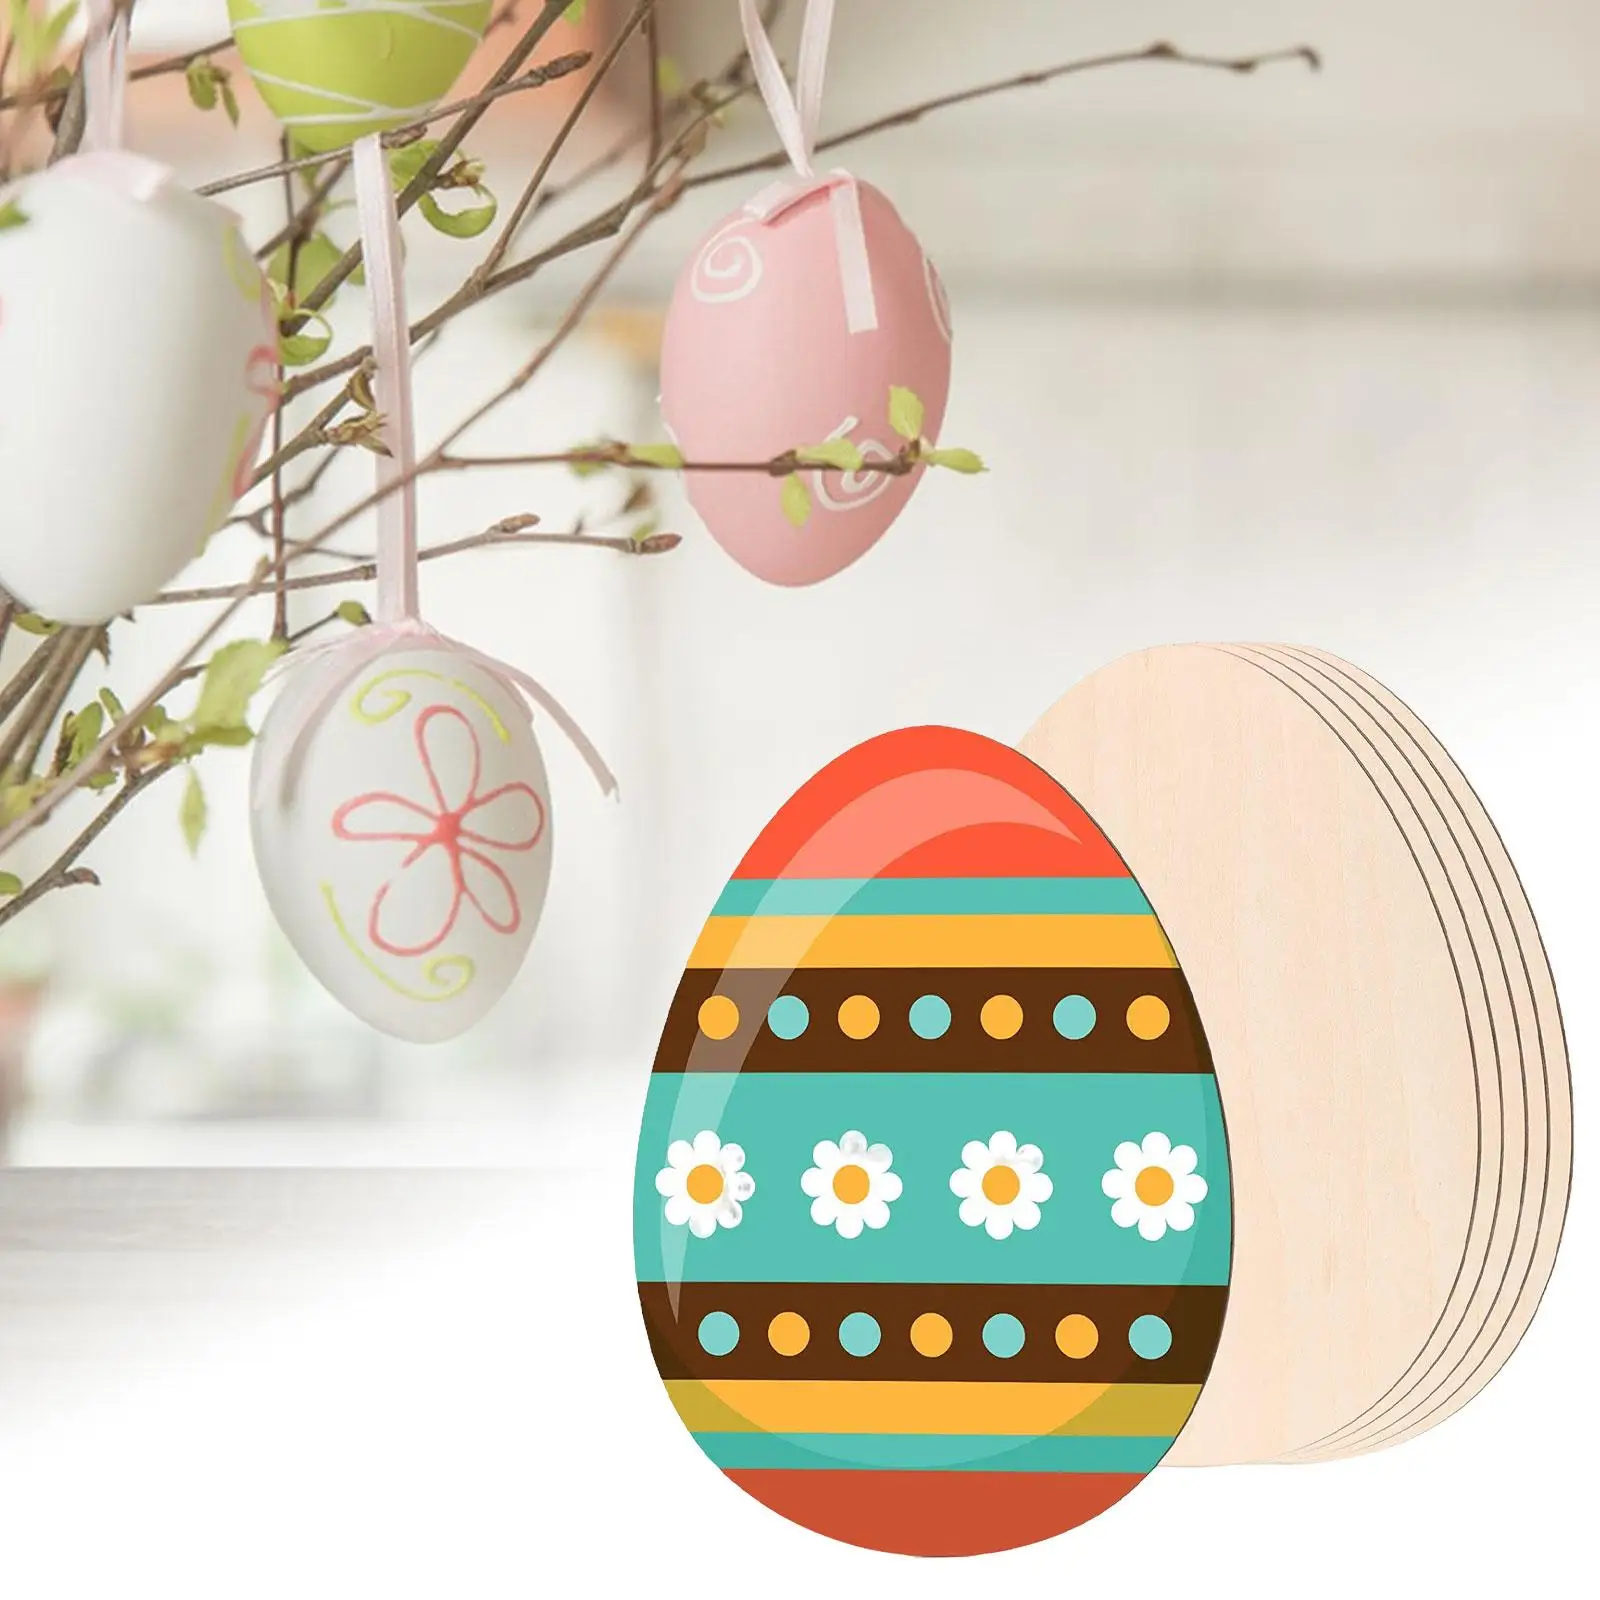 6 Pieces Wooden Easter Egg for Kids Painting Handcraft Blank Party Favor Supplies